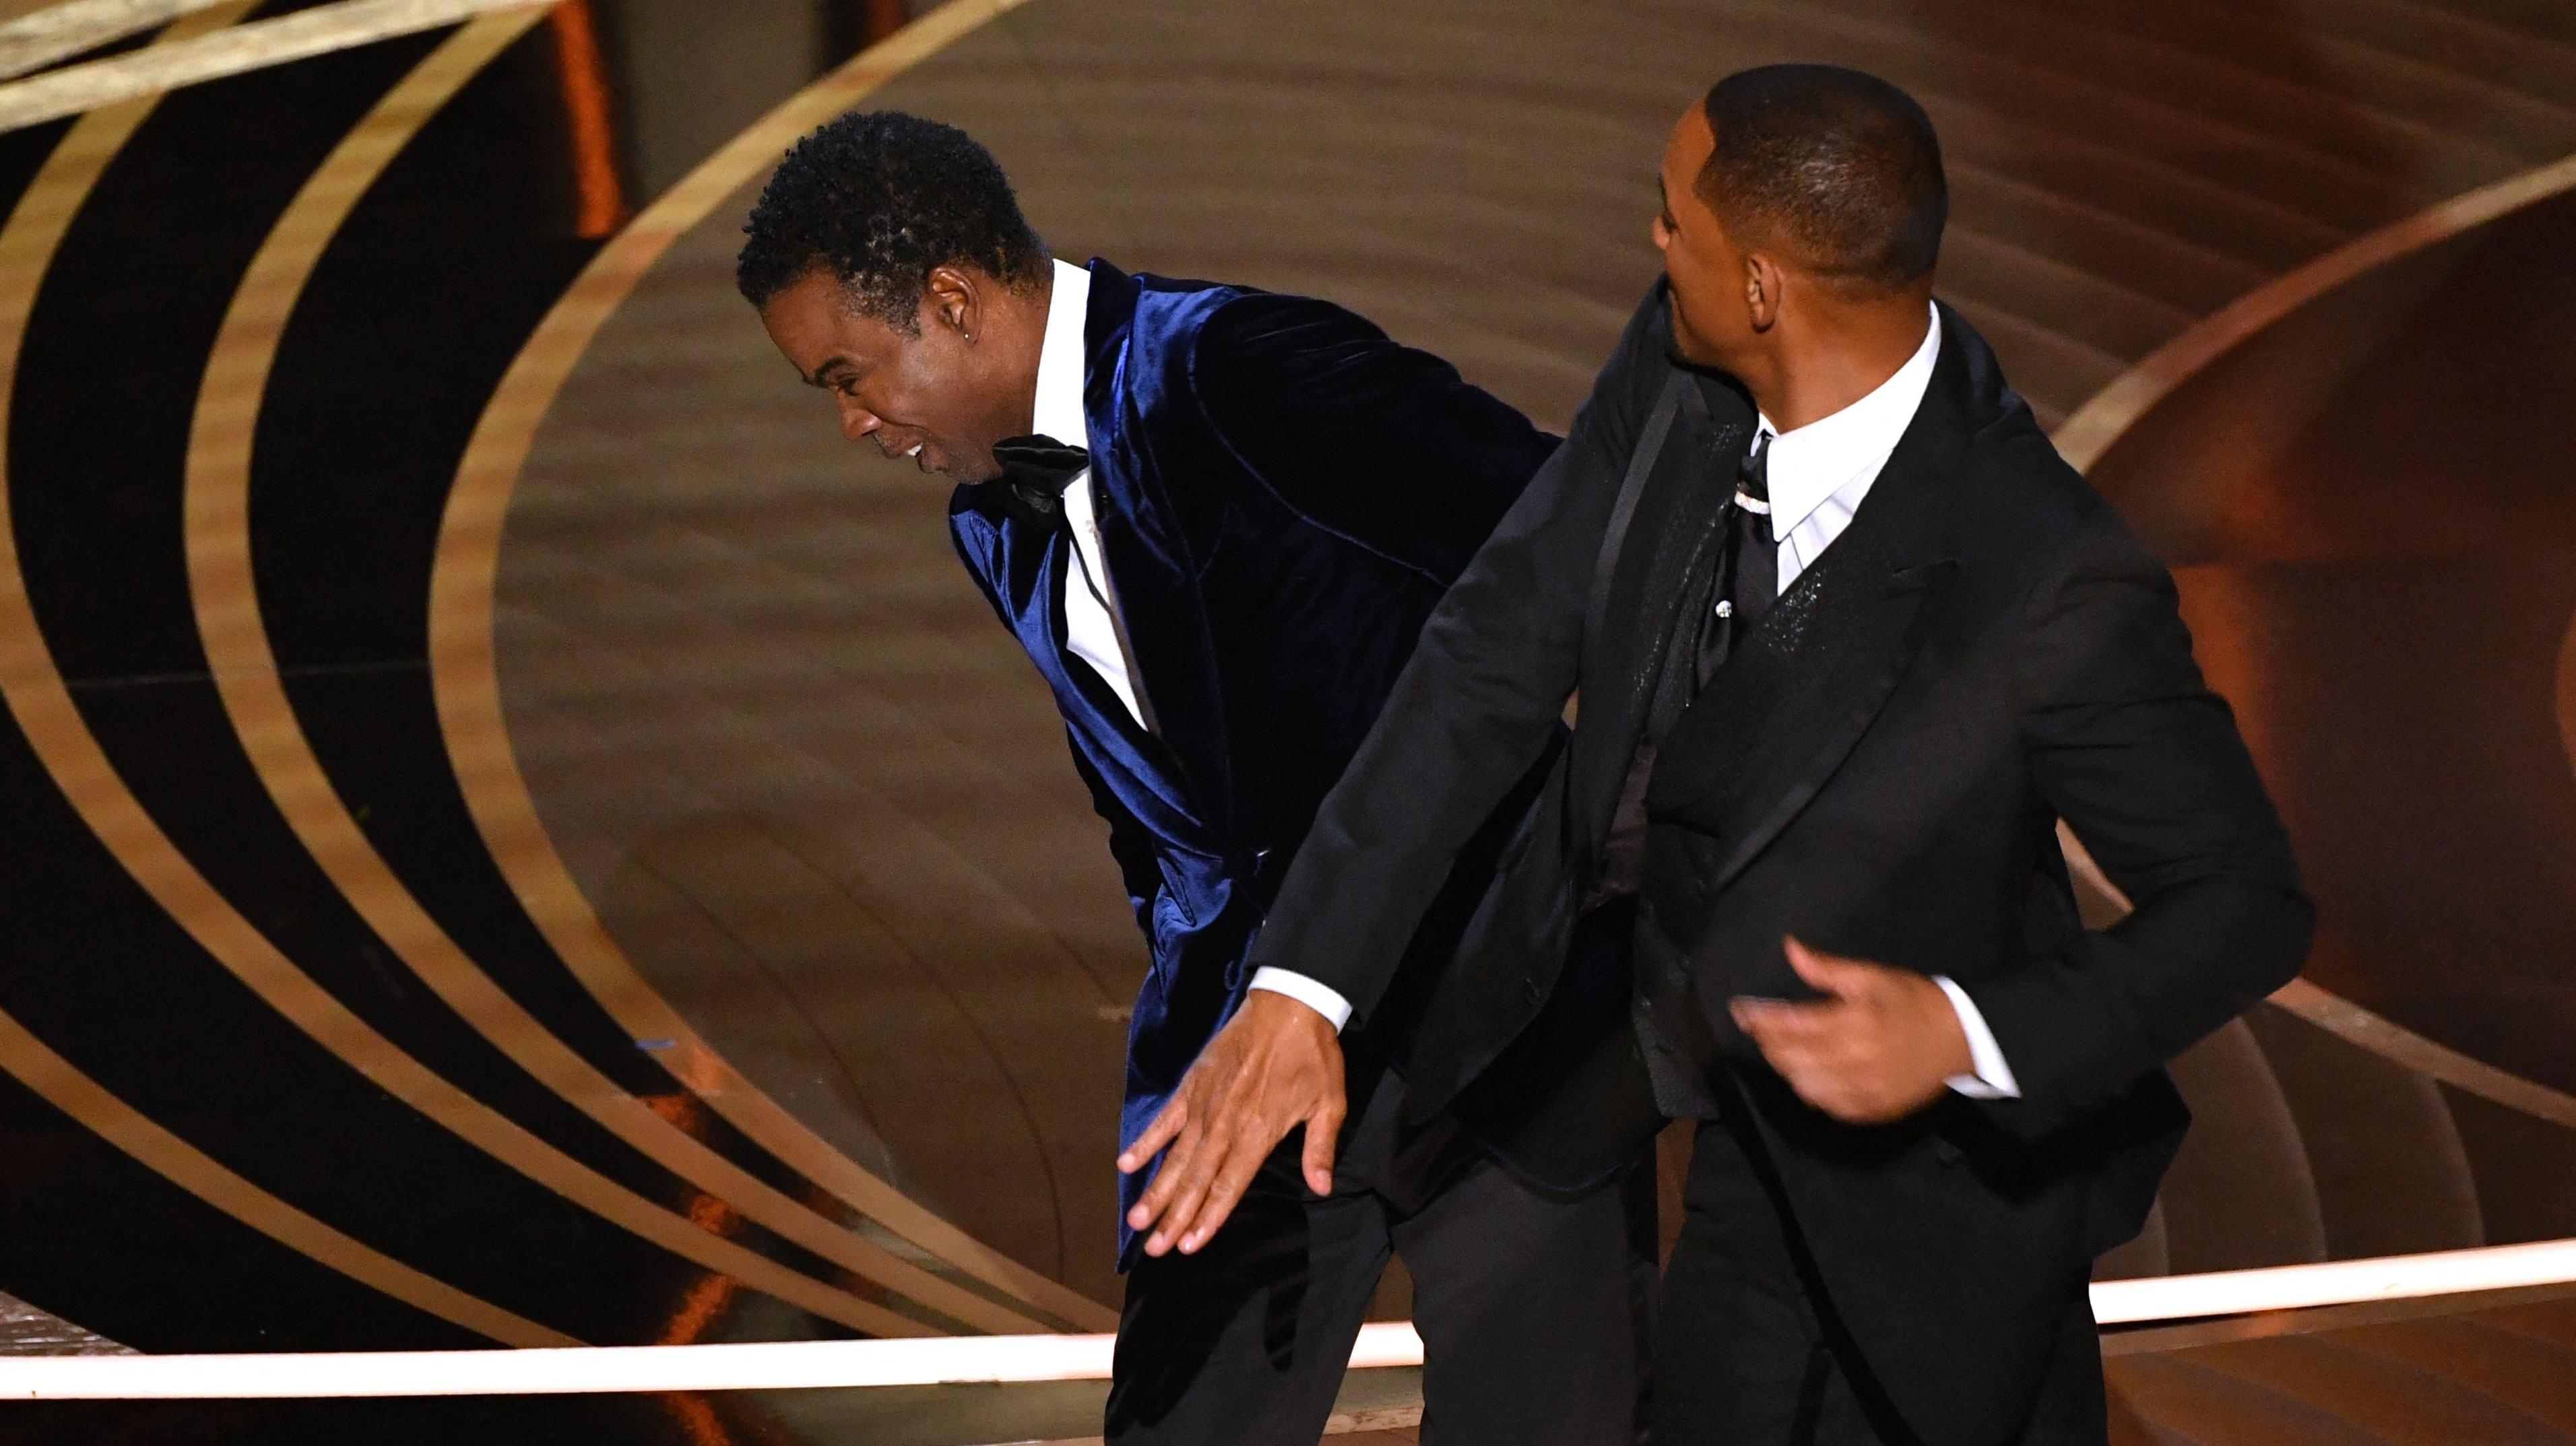 UPDATE: Chris Rock won’t press charges against Will Smith but Academy started a “formal review”